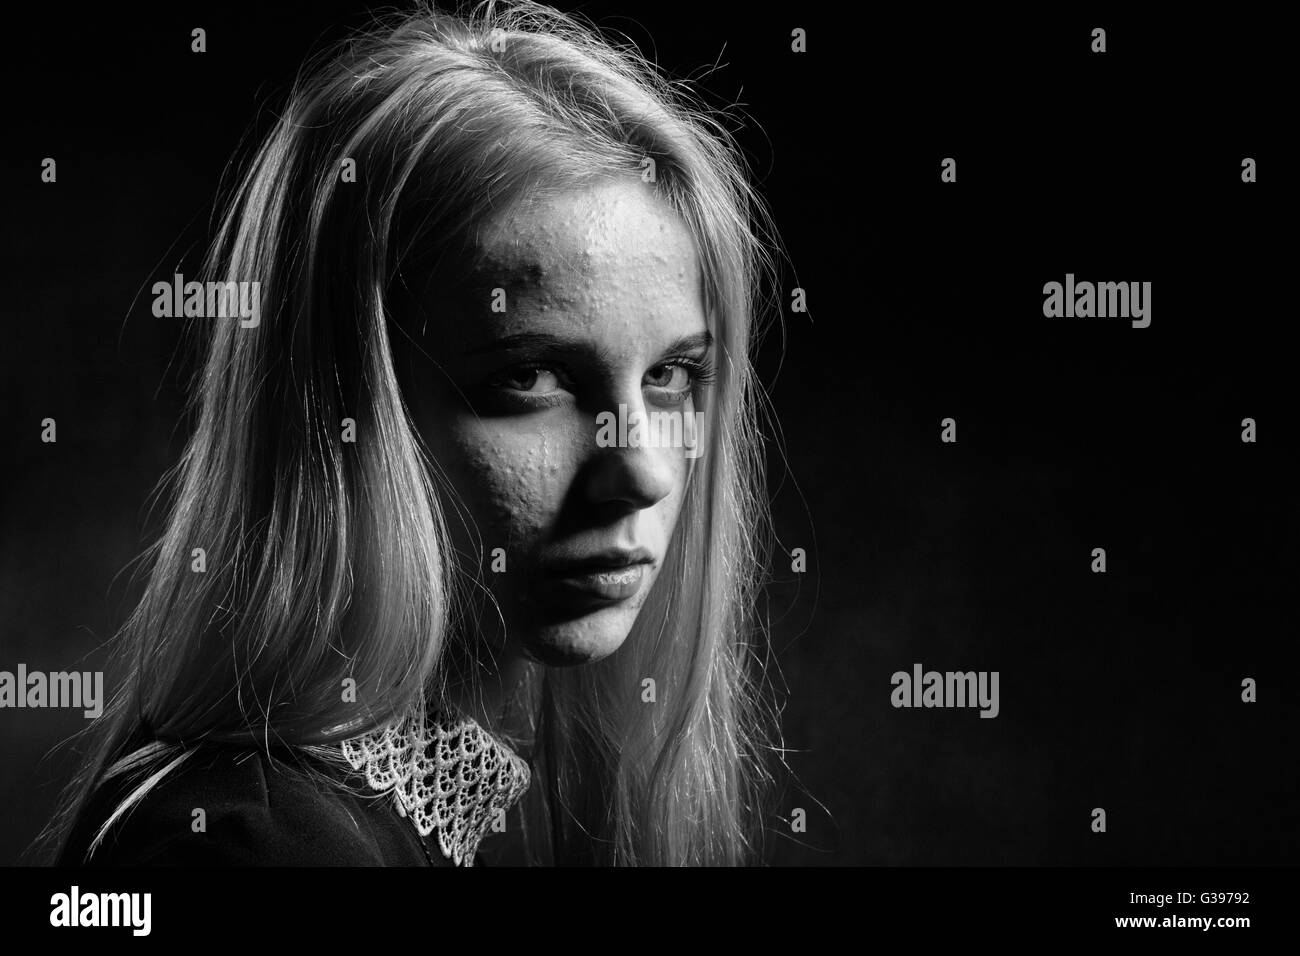 blond girl with pimply skin crying on black background, monochrome Stock Photo